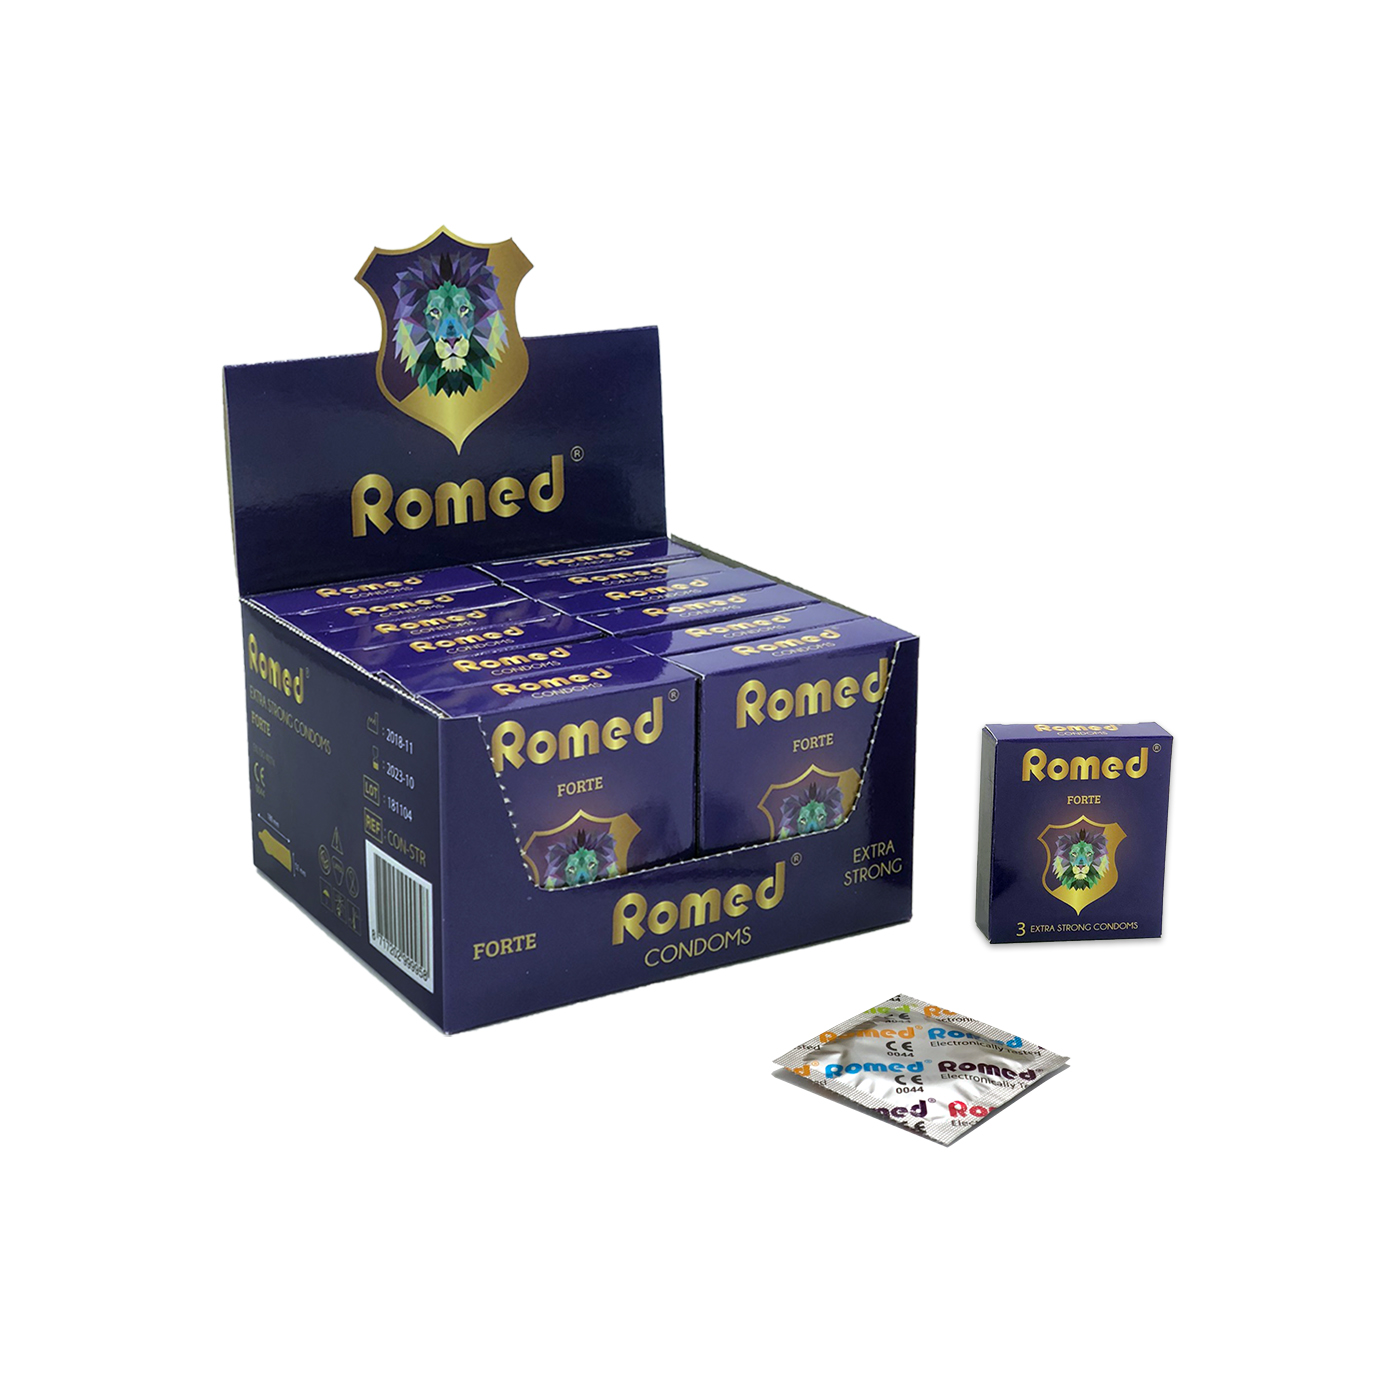 CON-STR Romed condoms, extra strong, packed per piece in (square) foil, 3 pcs in a small box, 12 x 3 pcs = 36 pcs in a shelf ready box, 4 x 36 pcs = 144 pcs in an inner box (=1 gross), 30 x 144 pcs = 4.320 pcs in a carton.